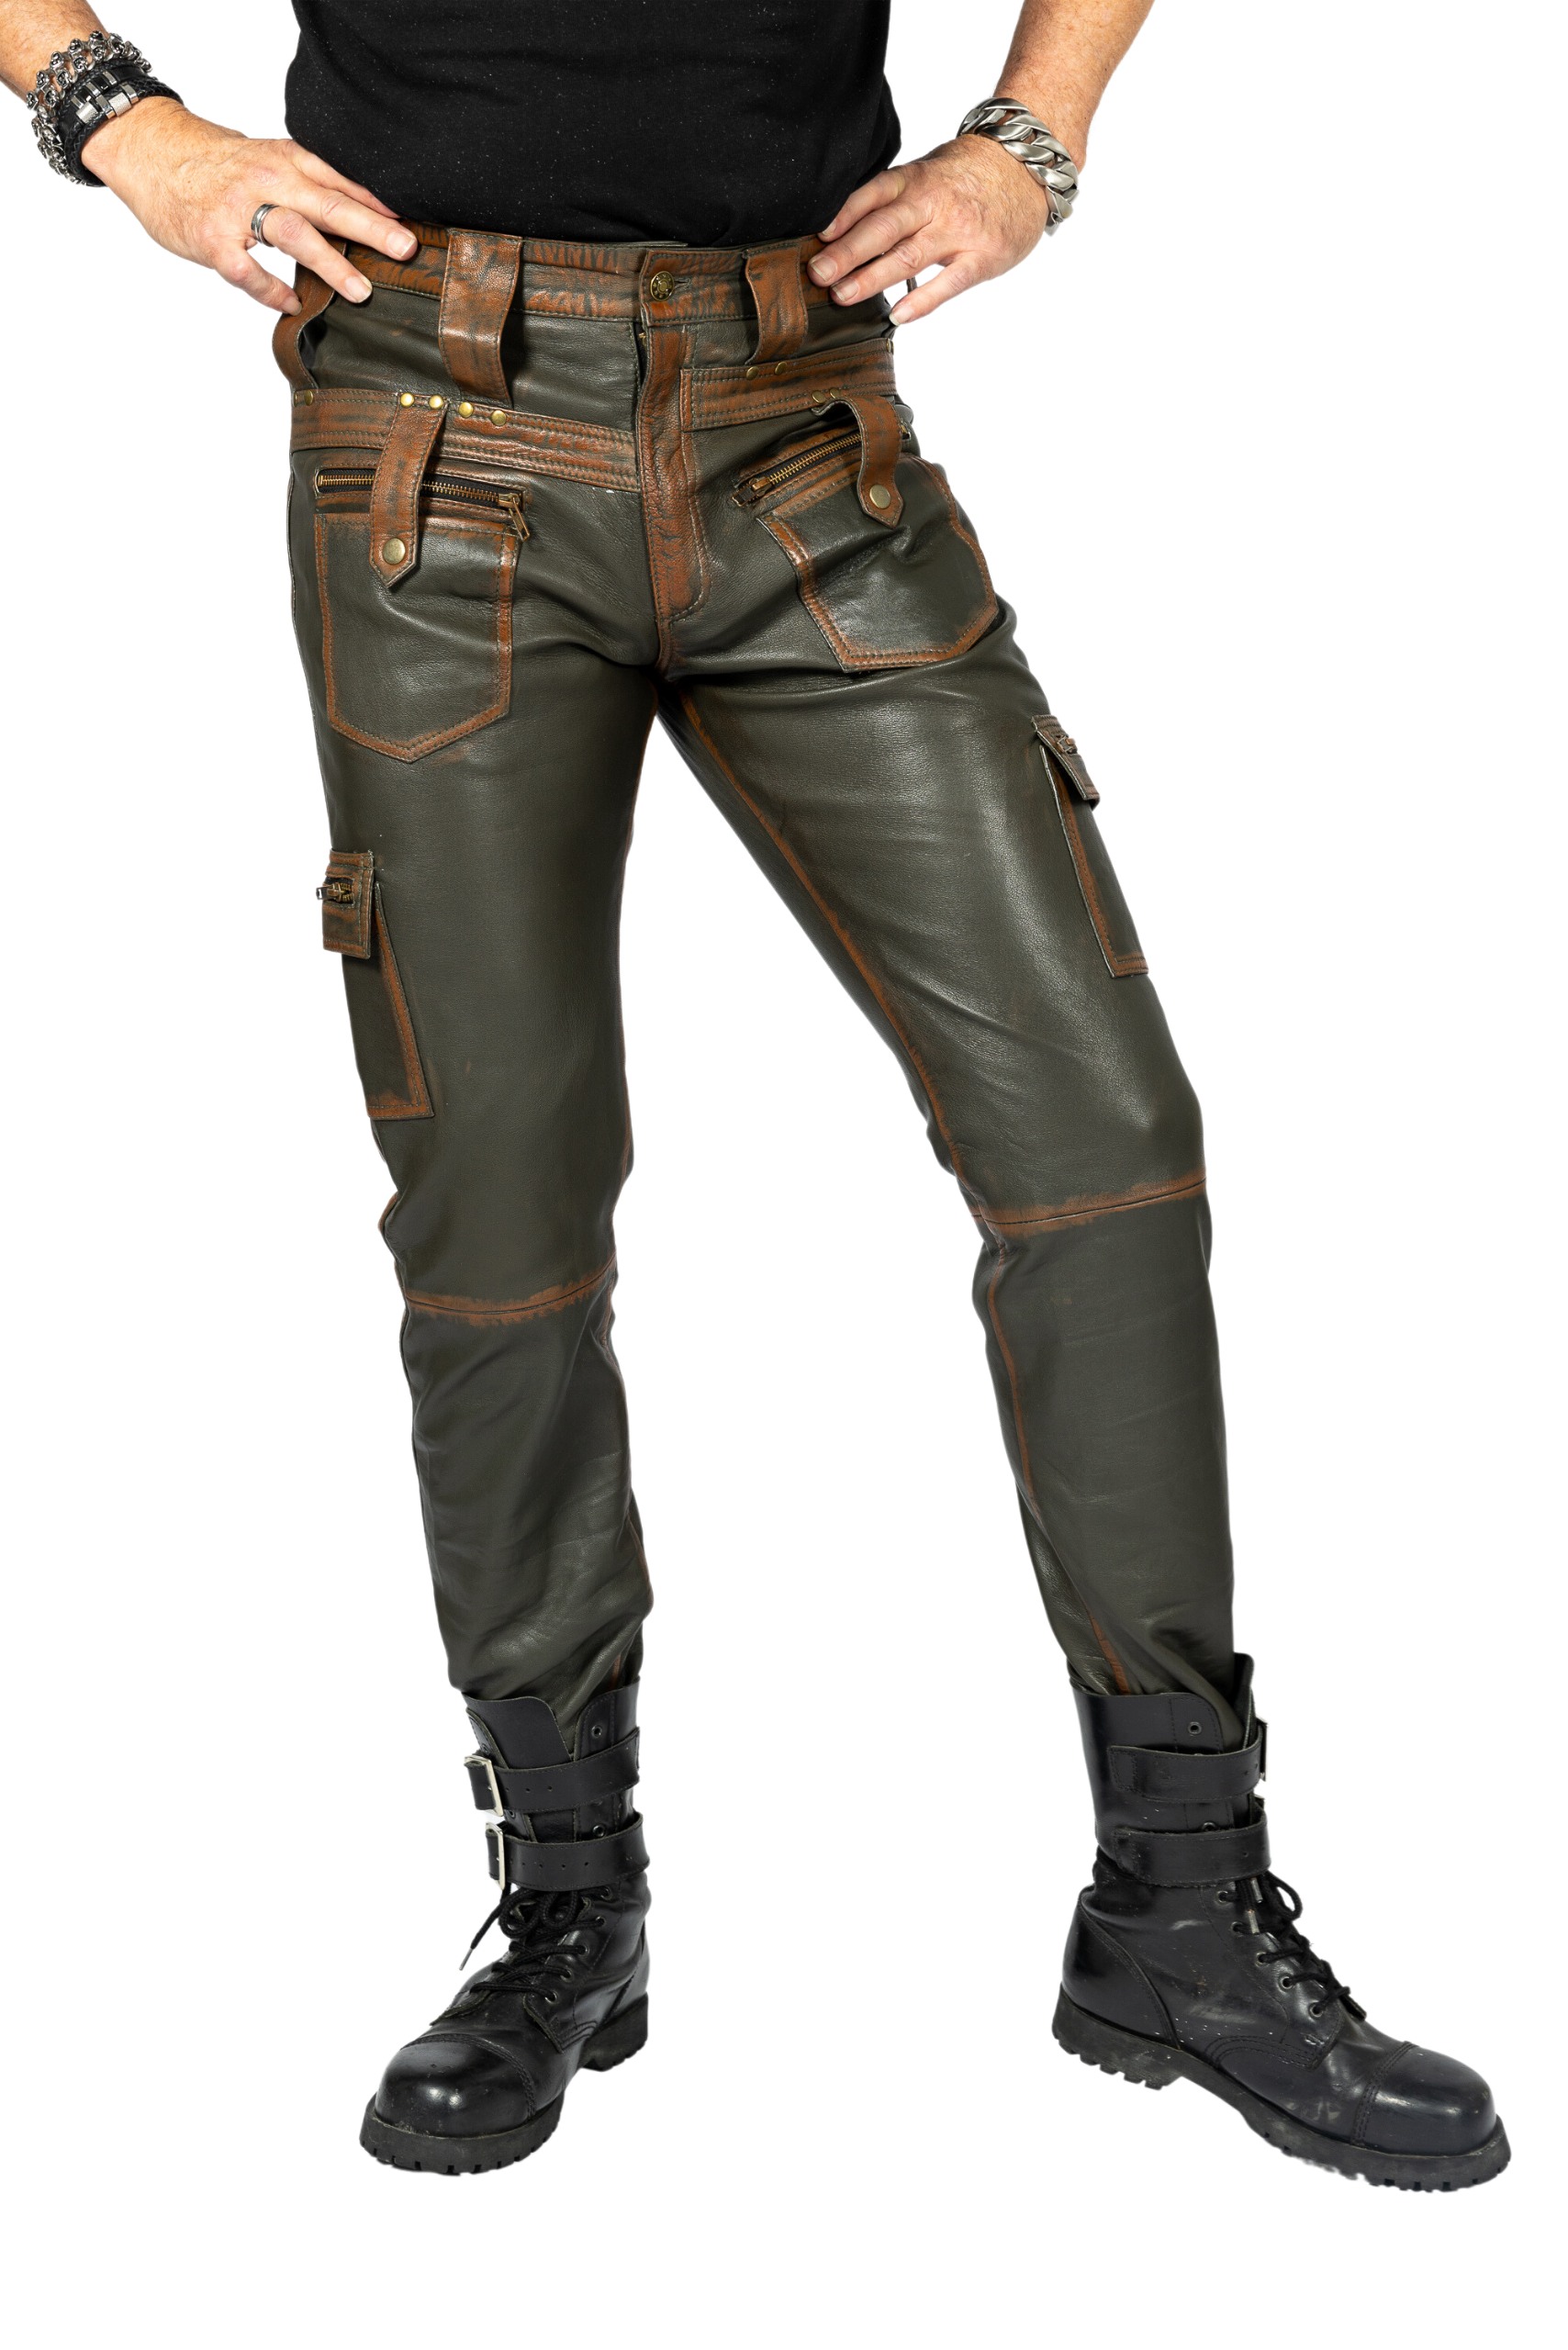 LEATHER Cargo Style trouser - Genuine Leather USED LOOK in olive